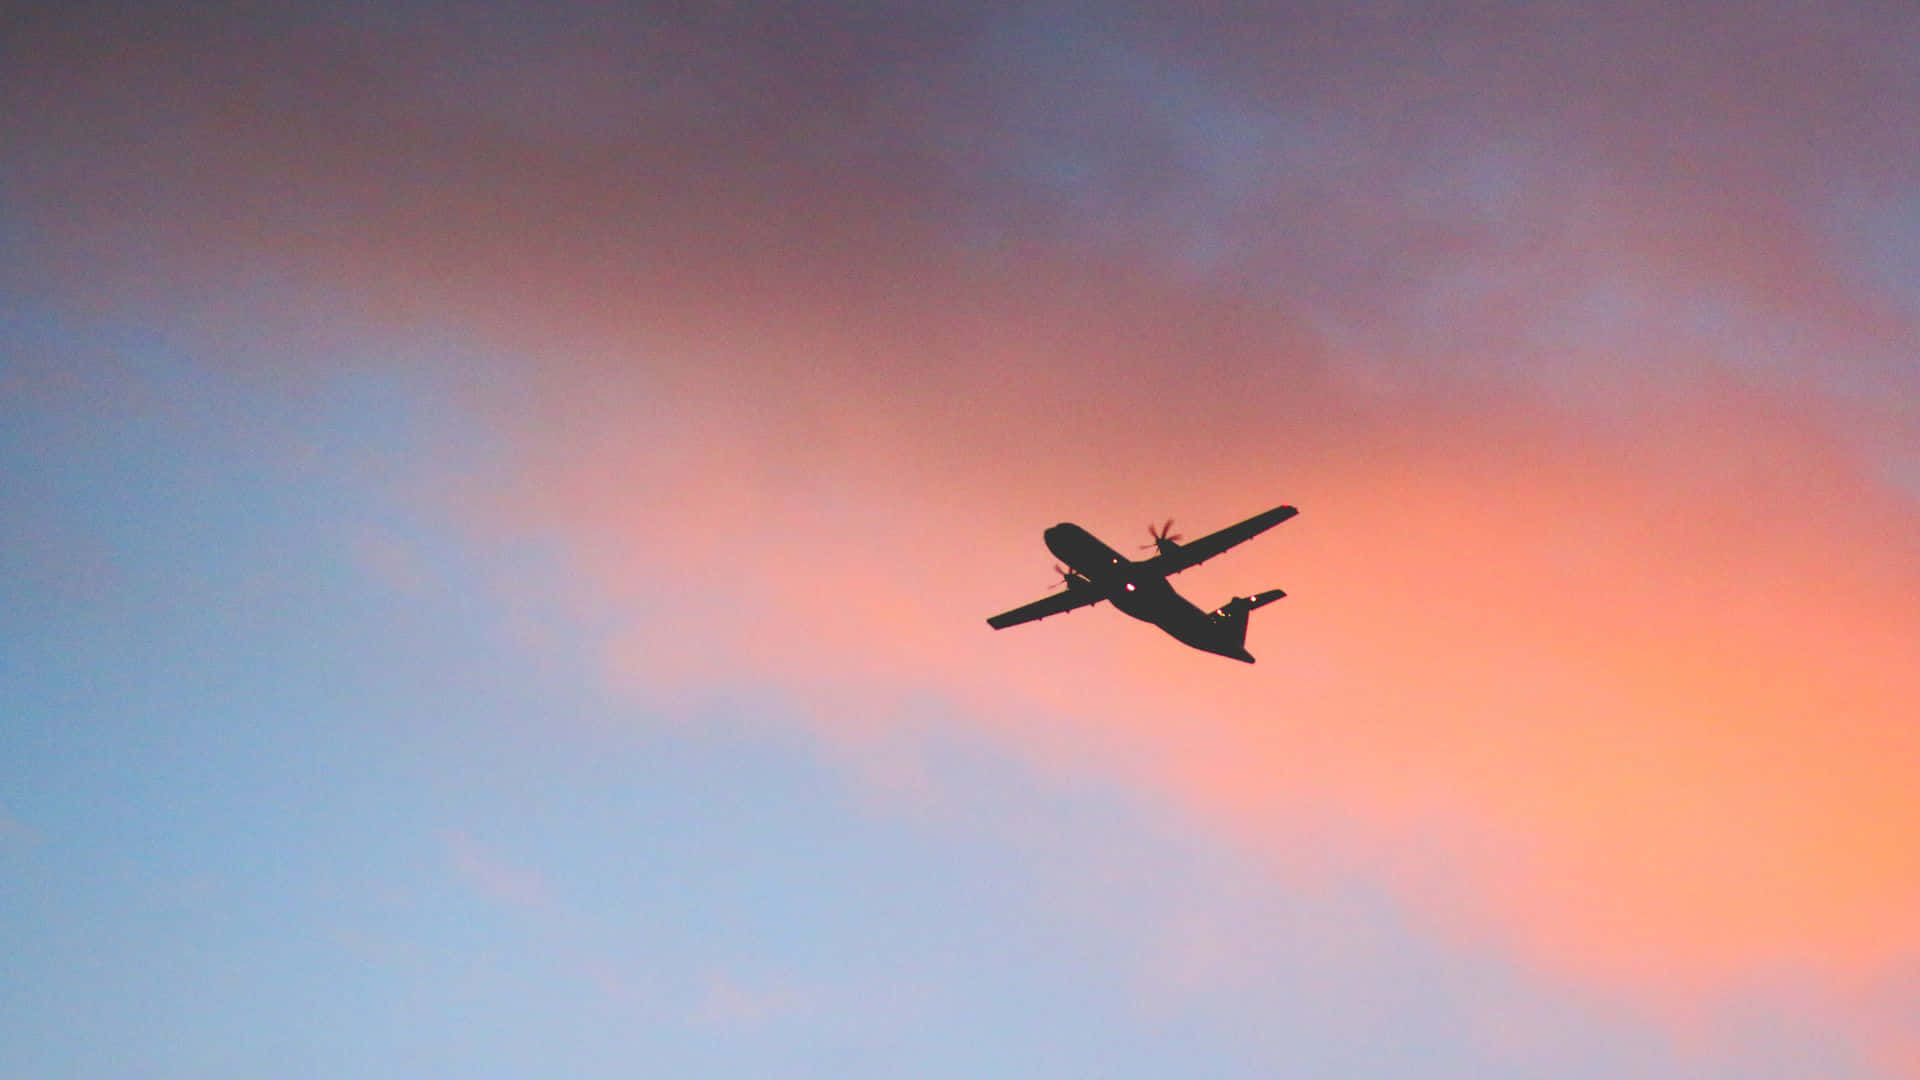 Airplane In The Sky With Sunset Background